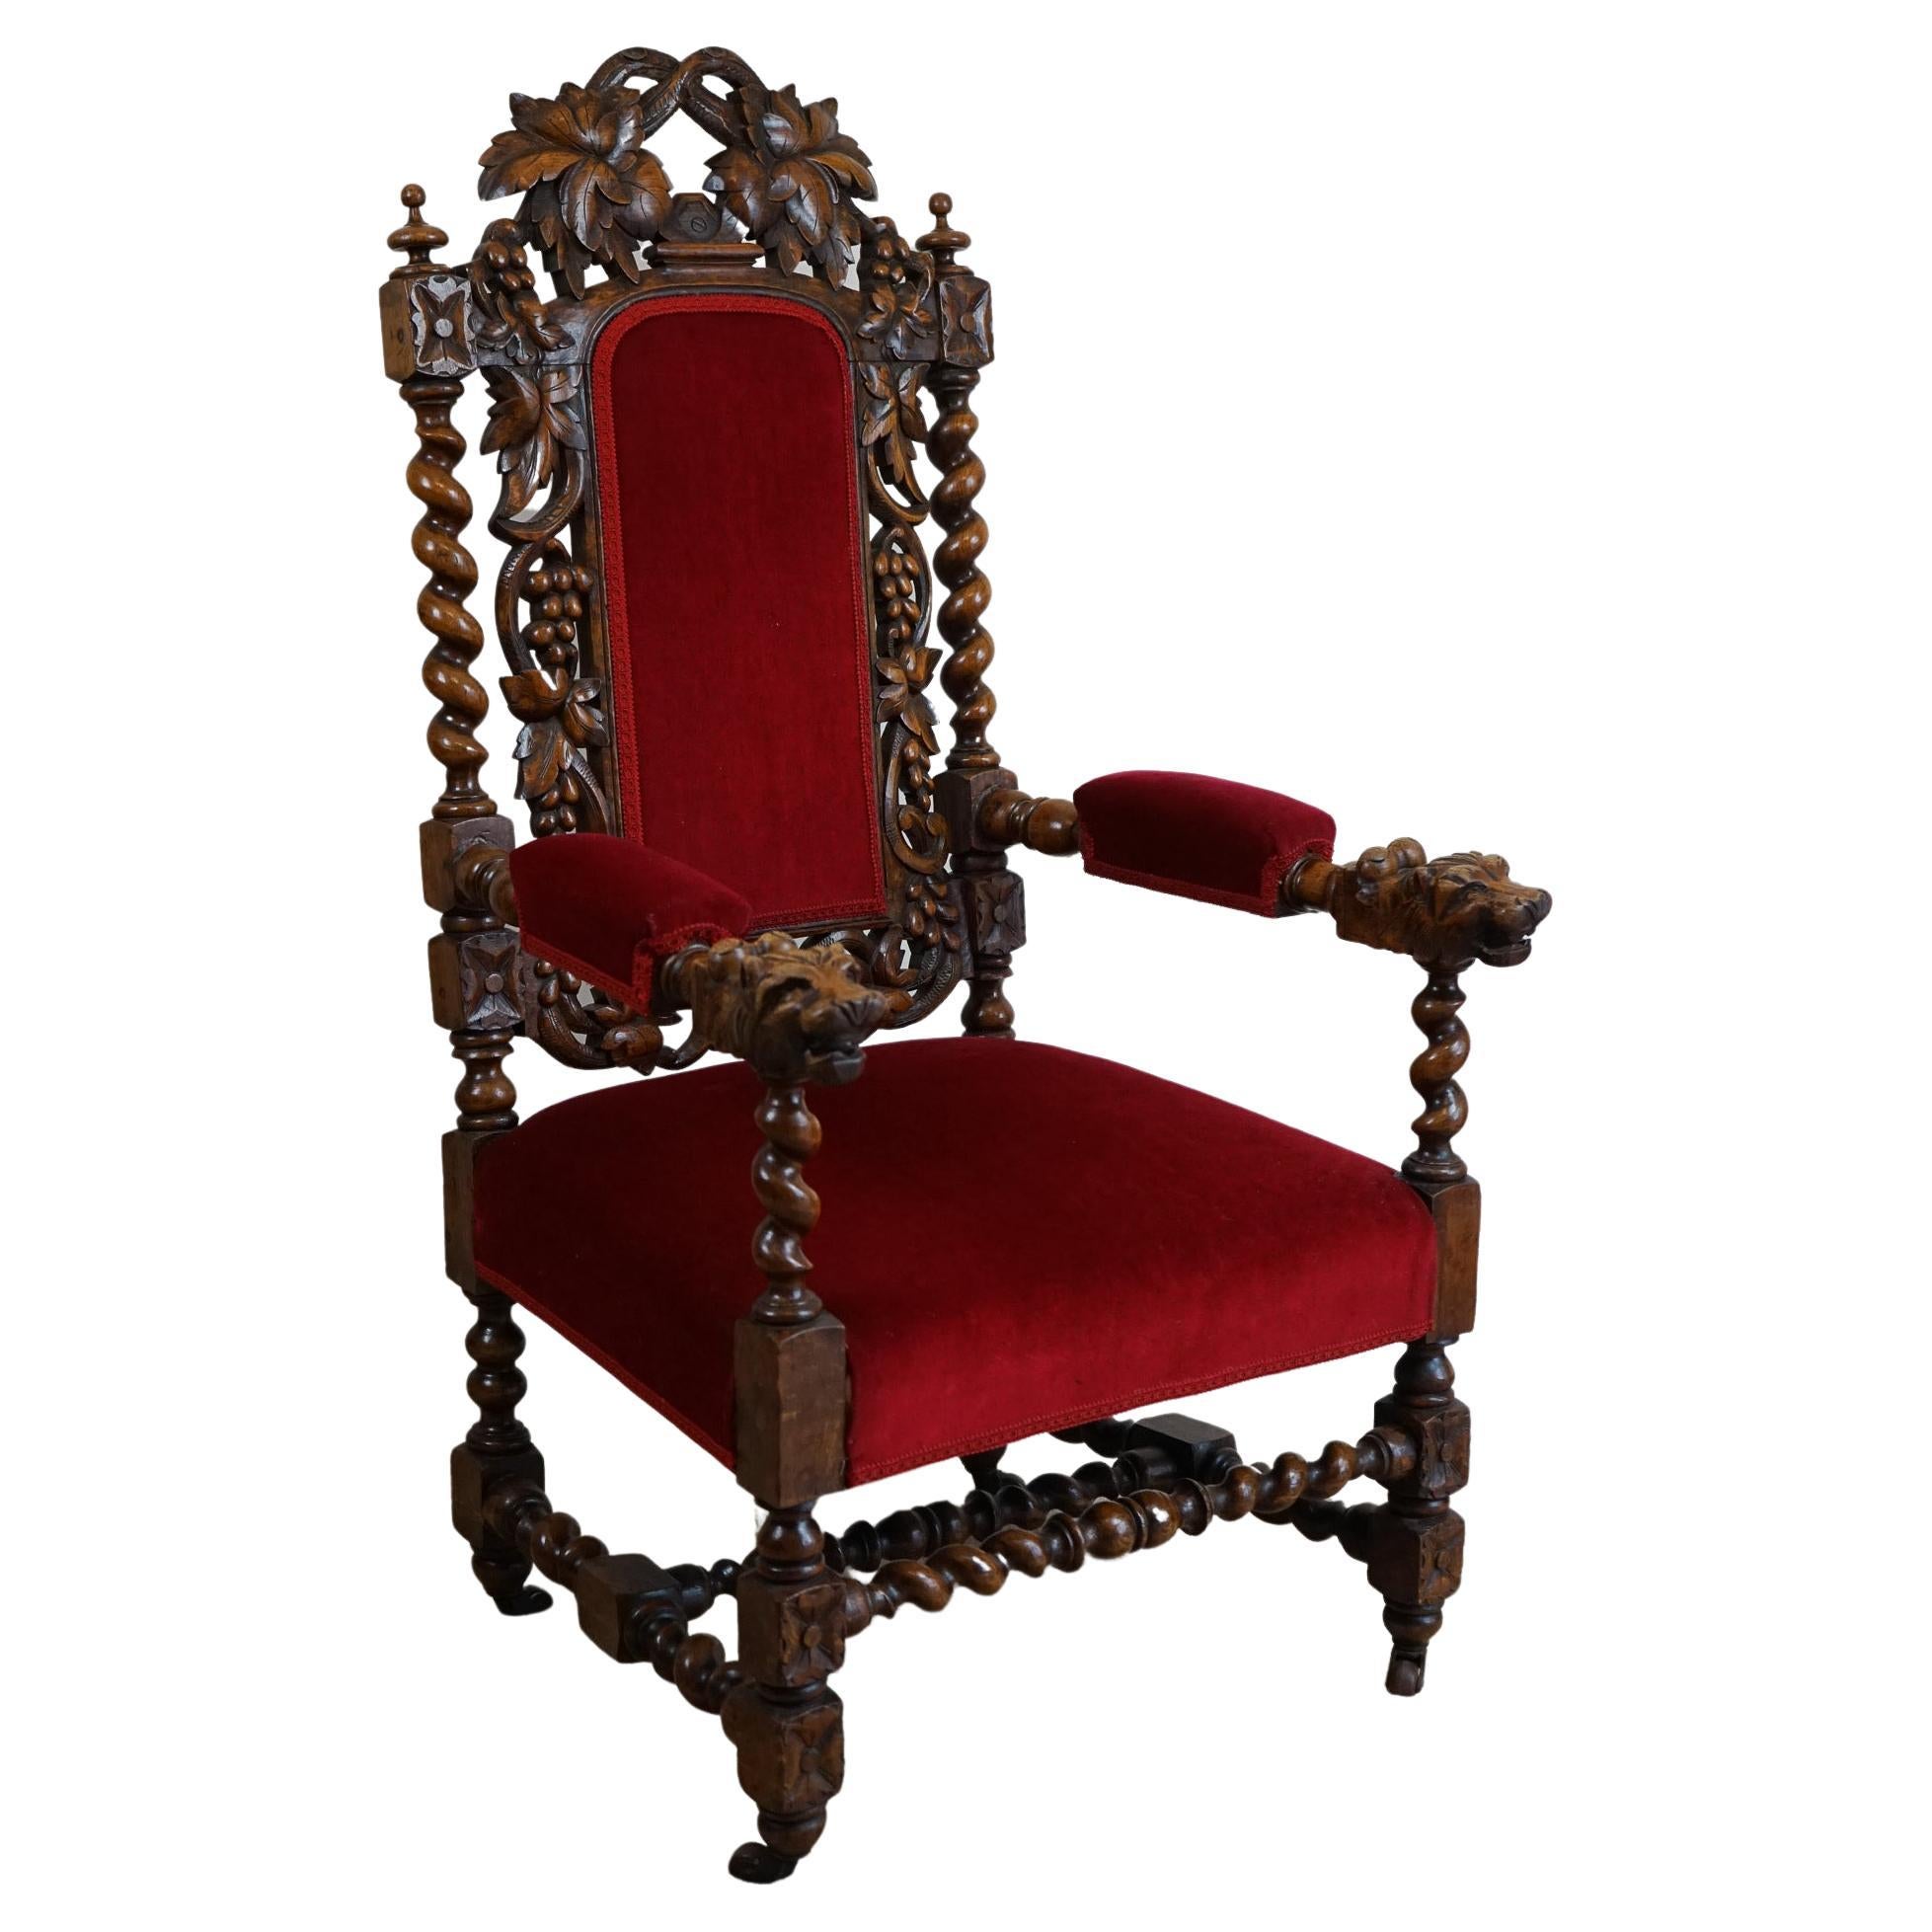 Carved oak throne high back chair with carved backrest. Each armrest has a carved lion head. The seat and back is upholstered in beautiful original red material and filled with horse hair , this particular throne chair is made in UK between